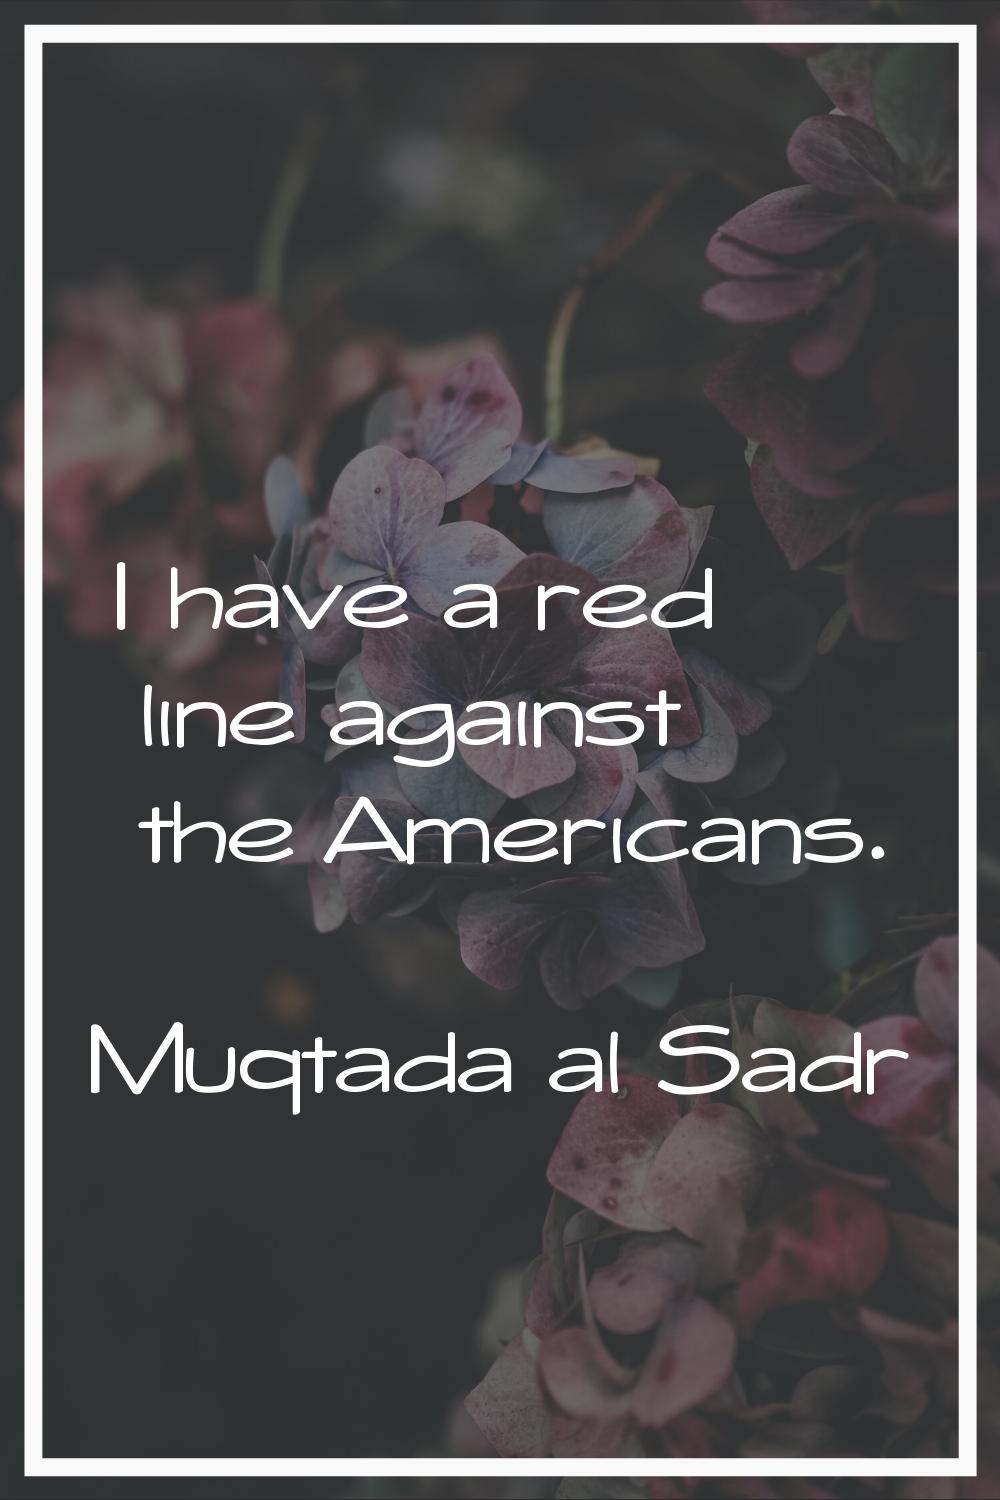 I have a red line against the Americans.